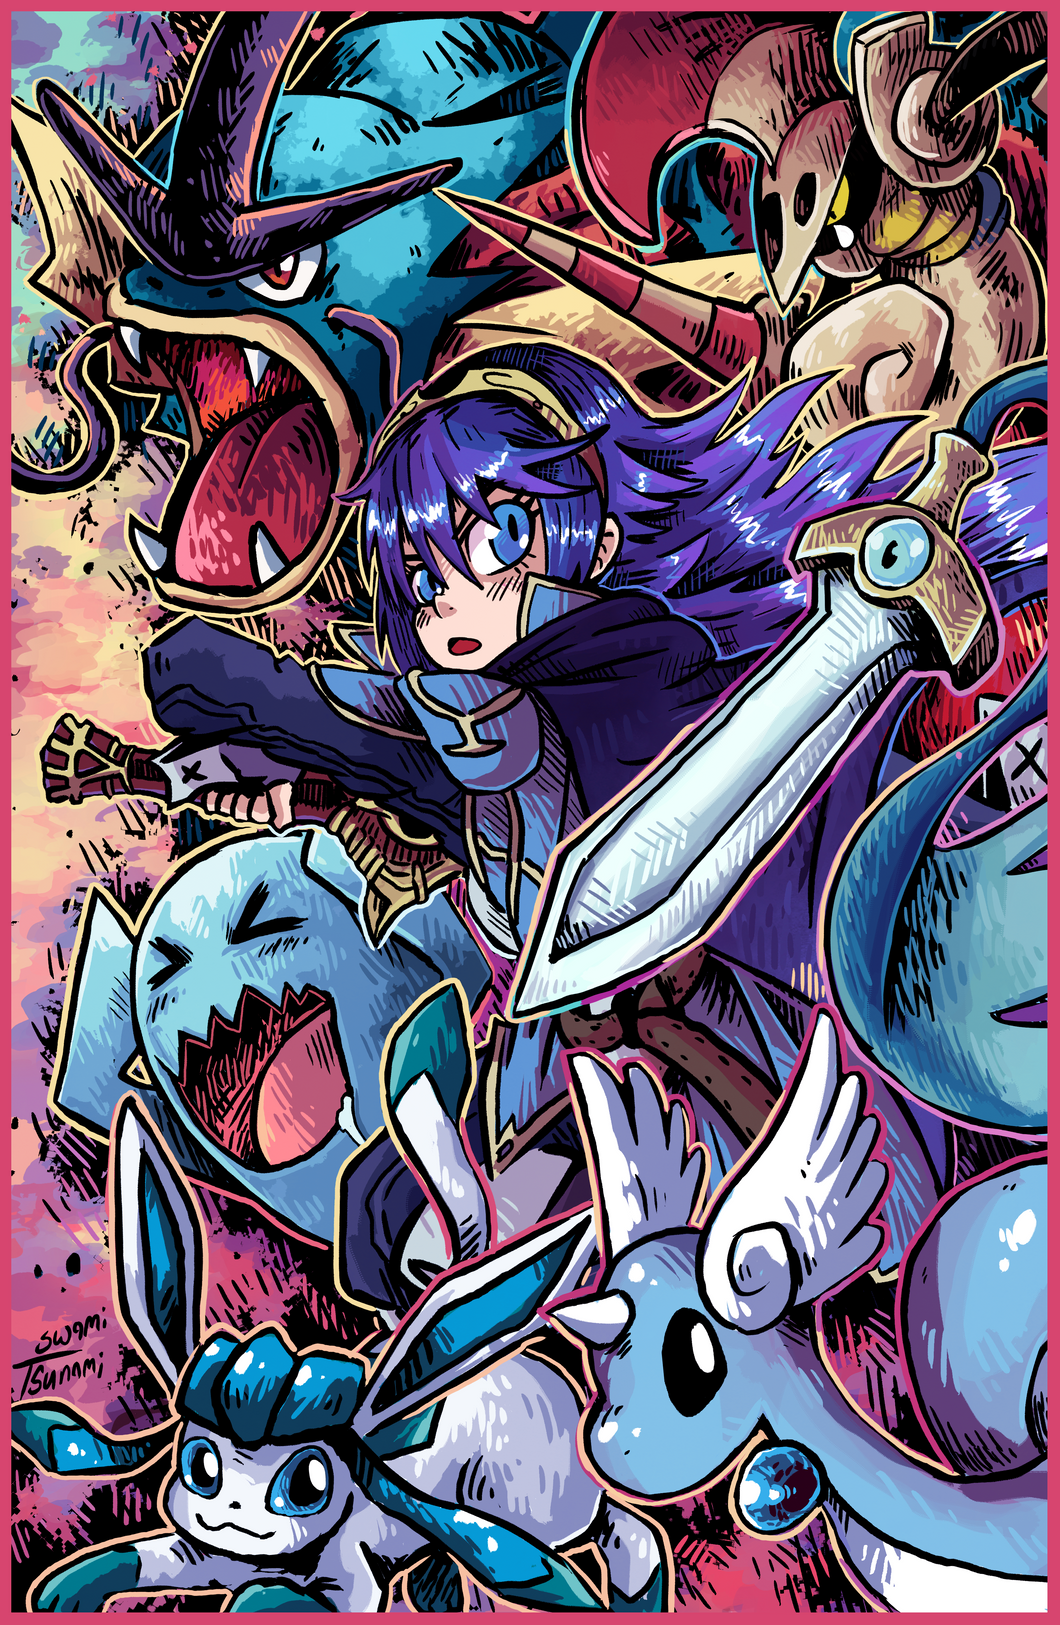 Lucina and her Poke Team - 11 x 17 Poster Print